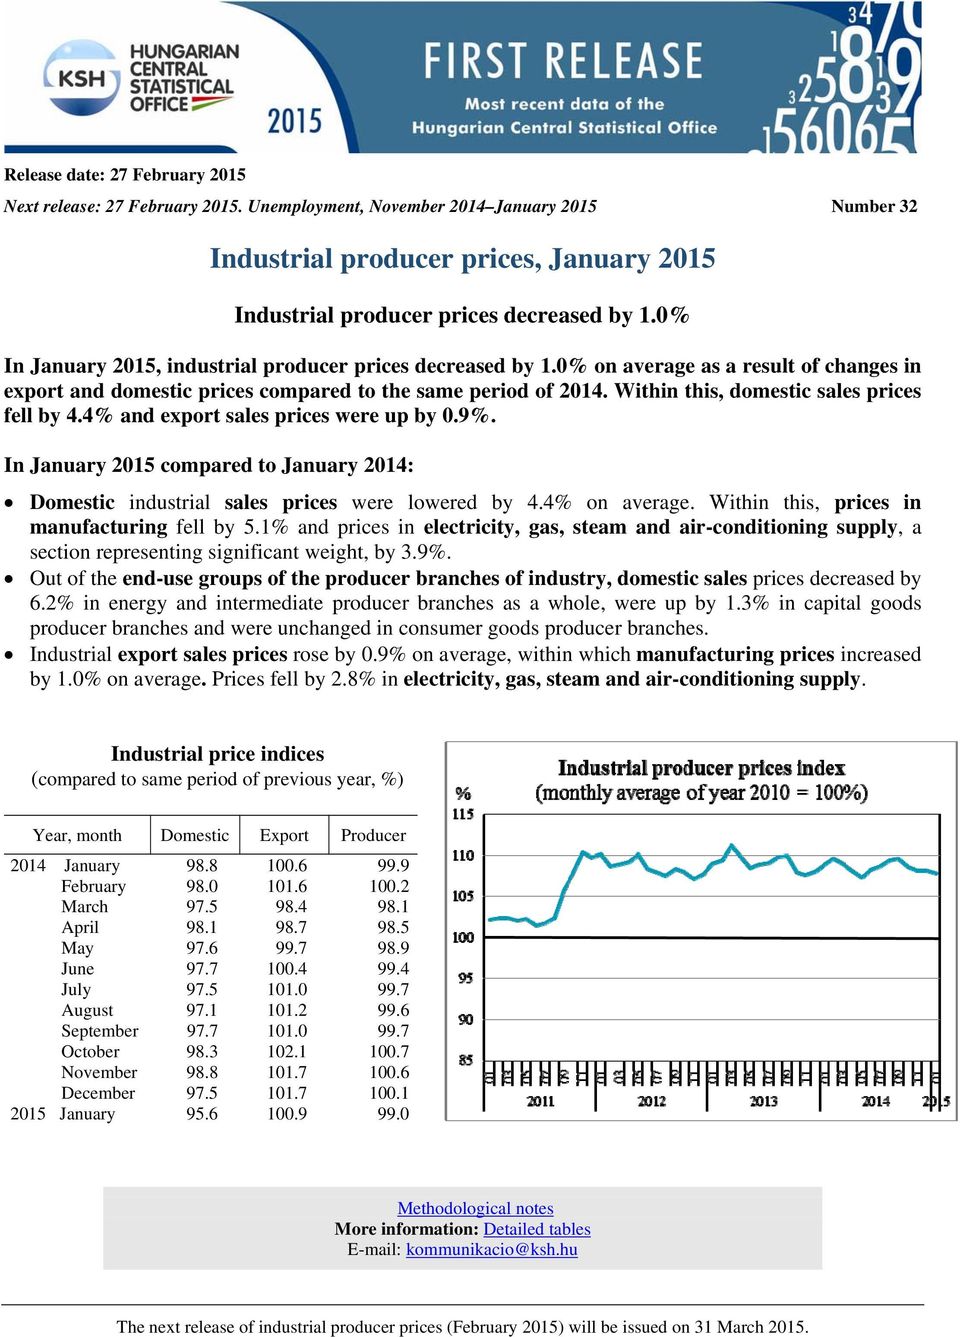 4% export sales prices were up by 0.9%. In January 2015 compared to January 2014: Domestic industrial sales prices were lowered by 4.4% on average. Within this, prices in manufacturing fell by 5.